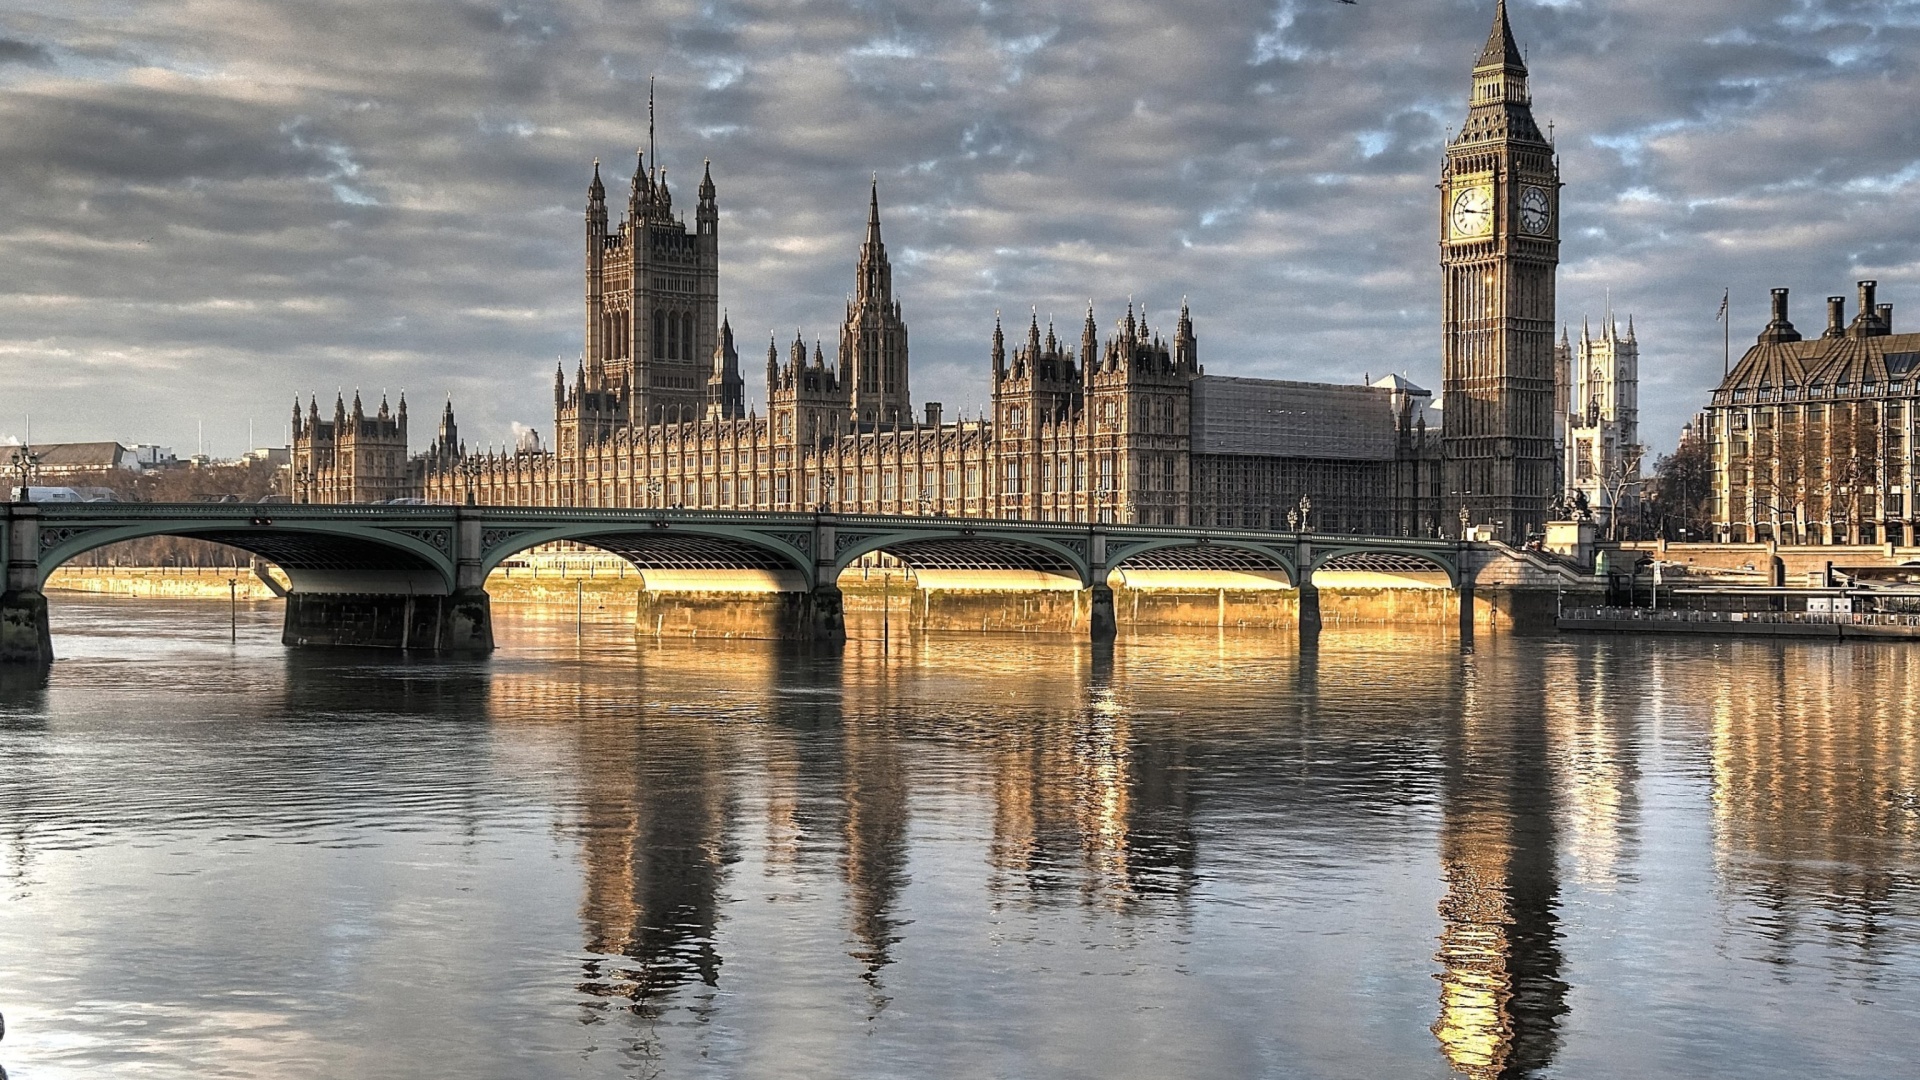 Palace of Westminster in London screenshot #1 1920x1080